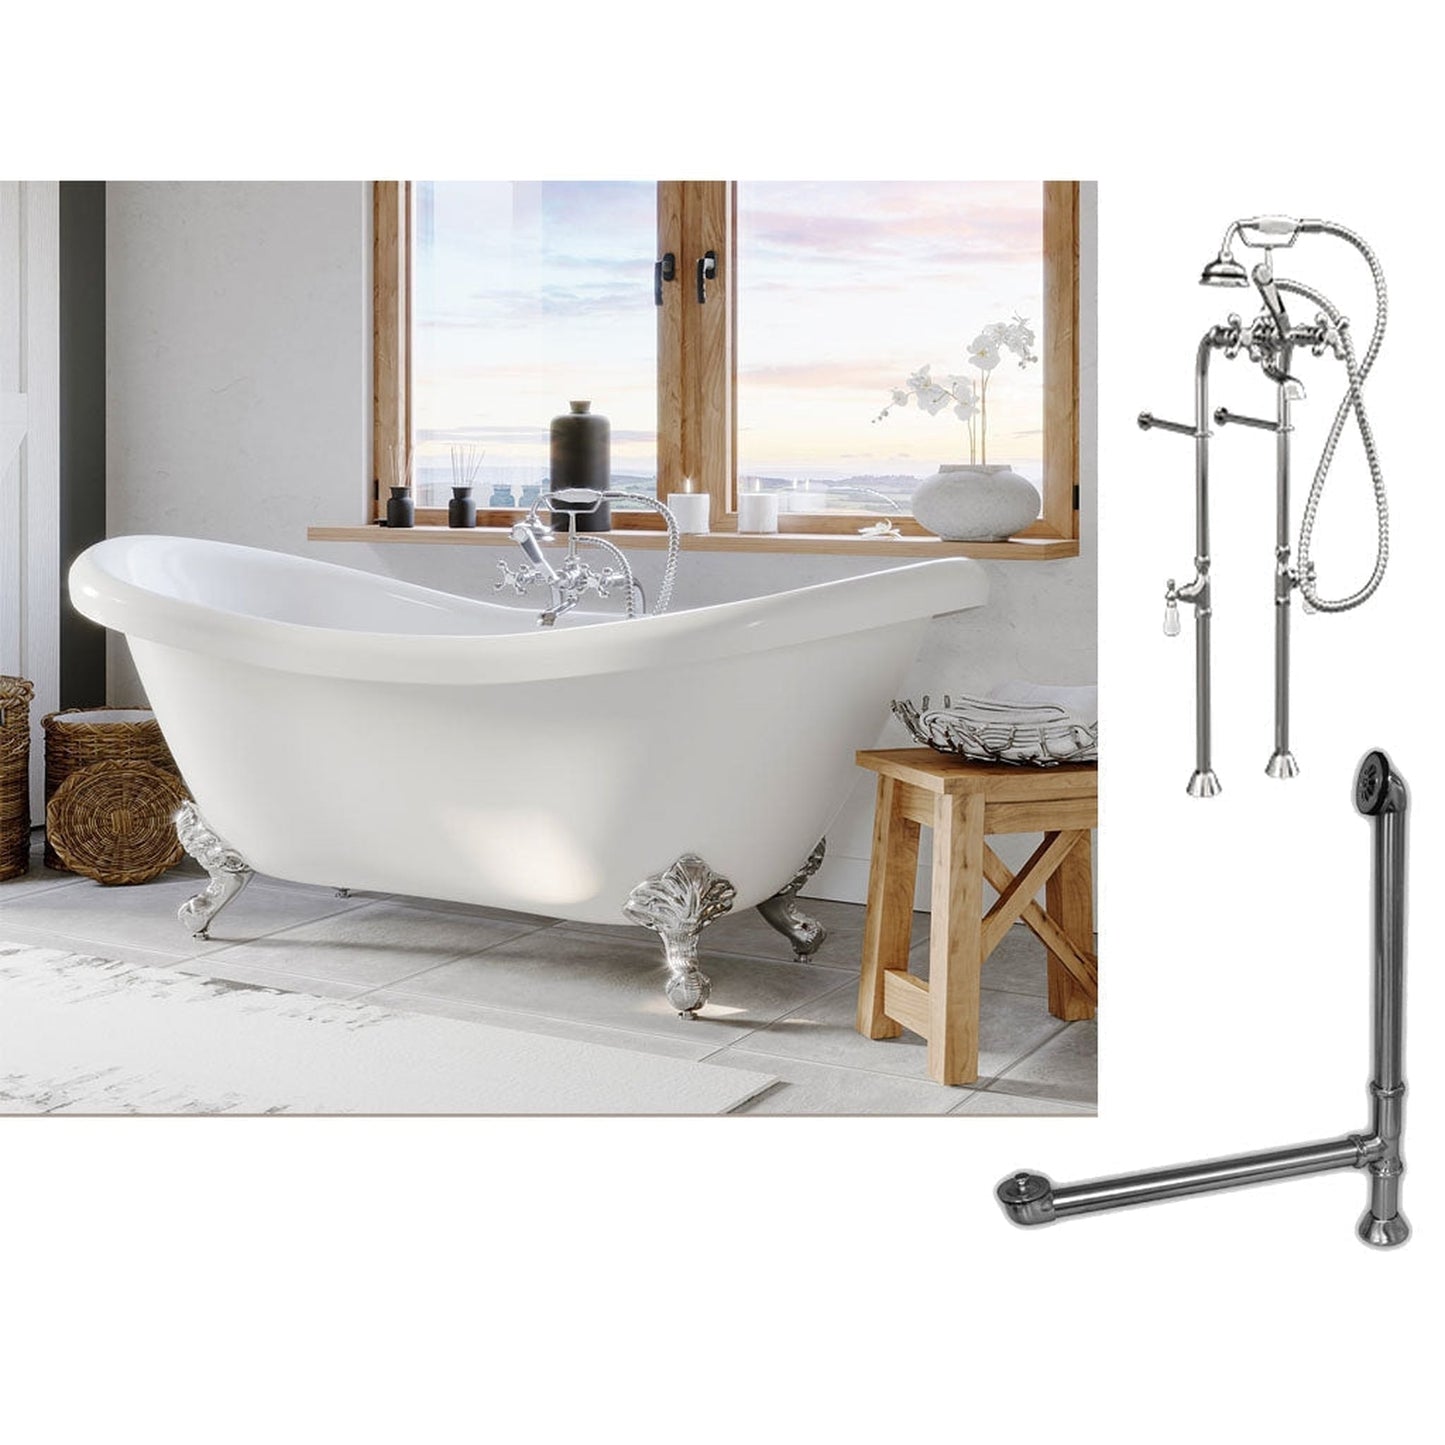 Cambridge Plumbing 69" White Double Slipper Clawfoot Acrylic Bathtub With No Deck Holes And Complete Plumbing Package Including Floor Mounted British Telephone Faucet, Drain And Overflow Assembly In Polished Chrome